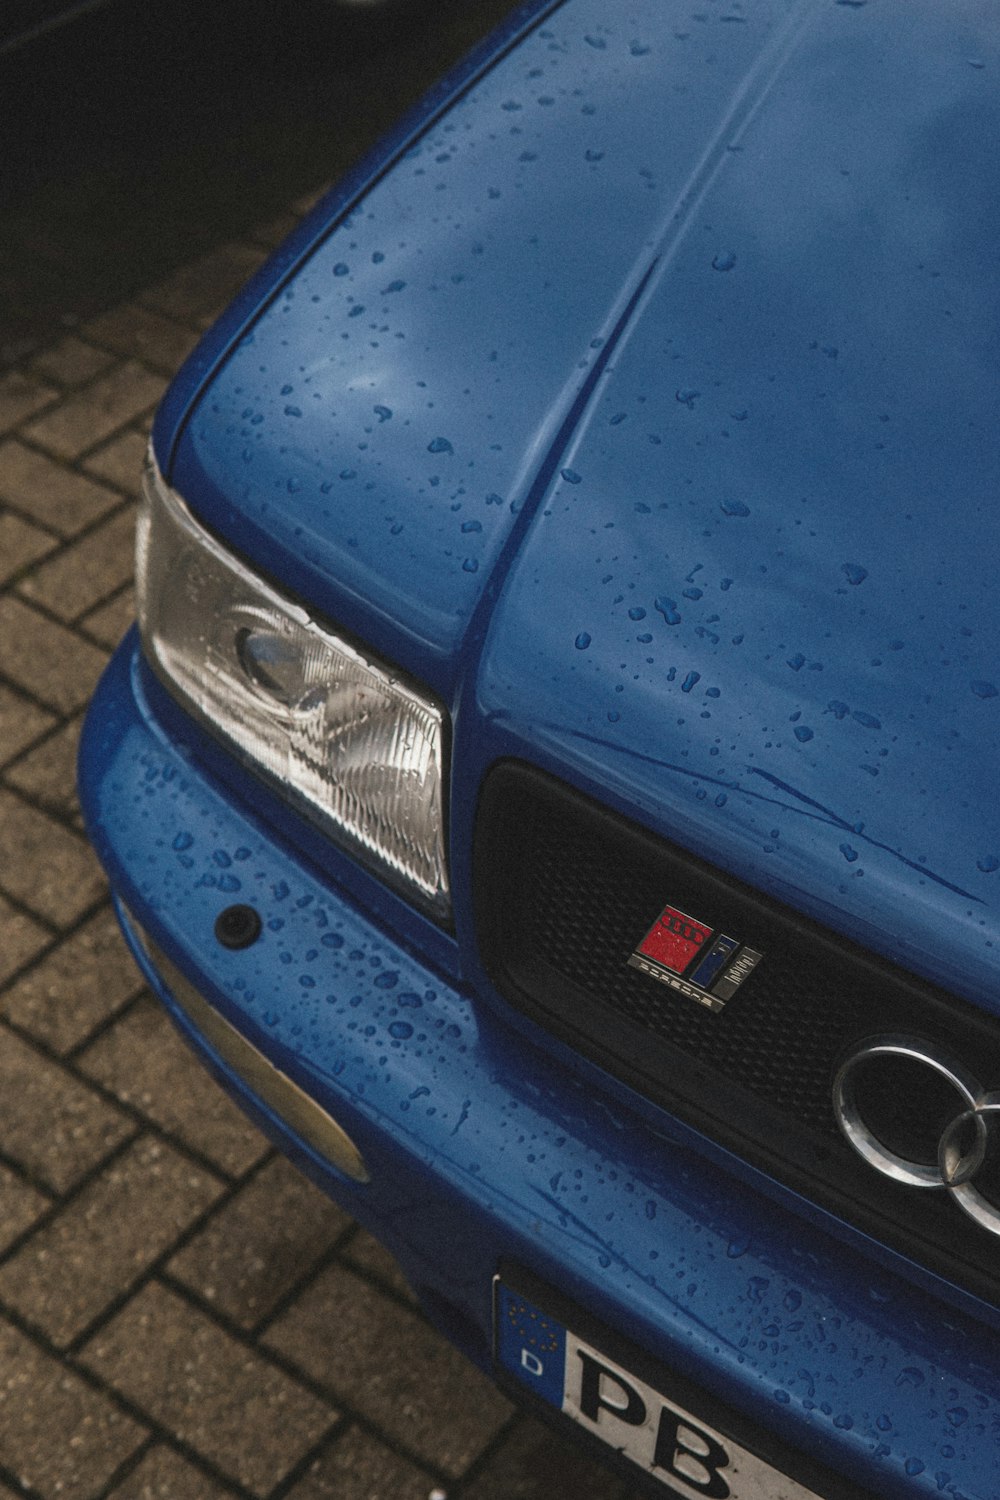 a close up of a blue car with rain drops on it